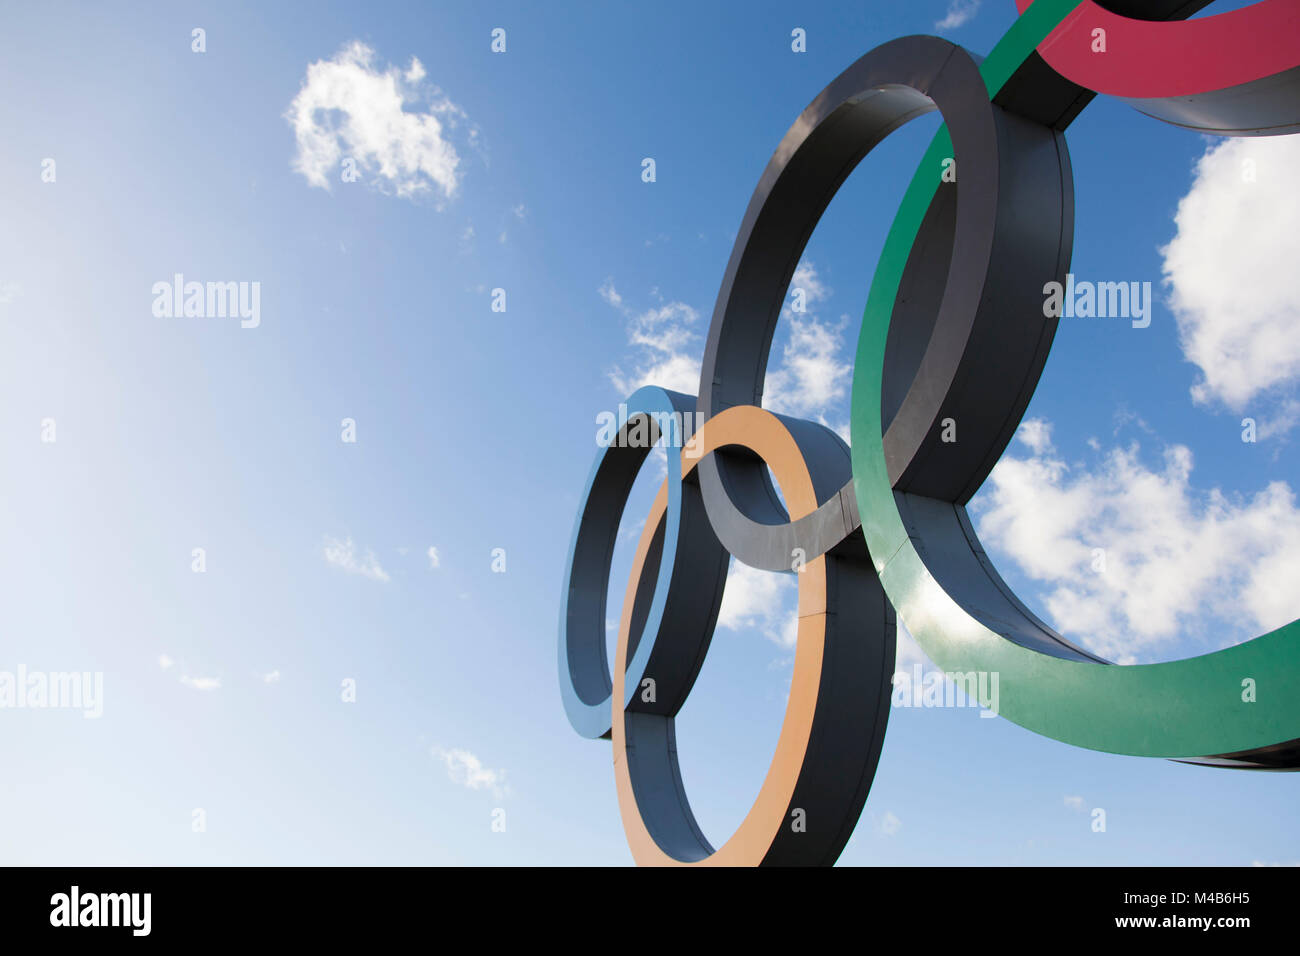 LONDON, UK - February 15th 2018: The Olympic symbol, made up of five interconnected coloured rings, under a blue sky Stock Photo